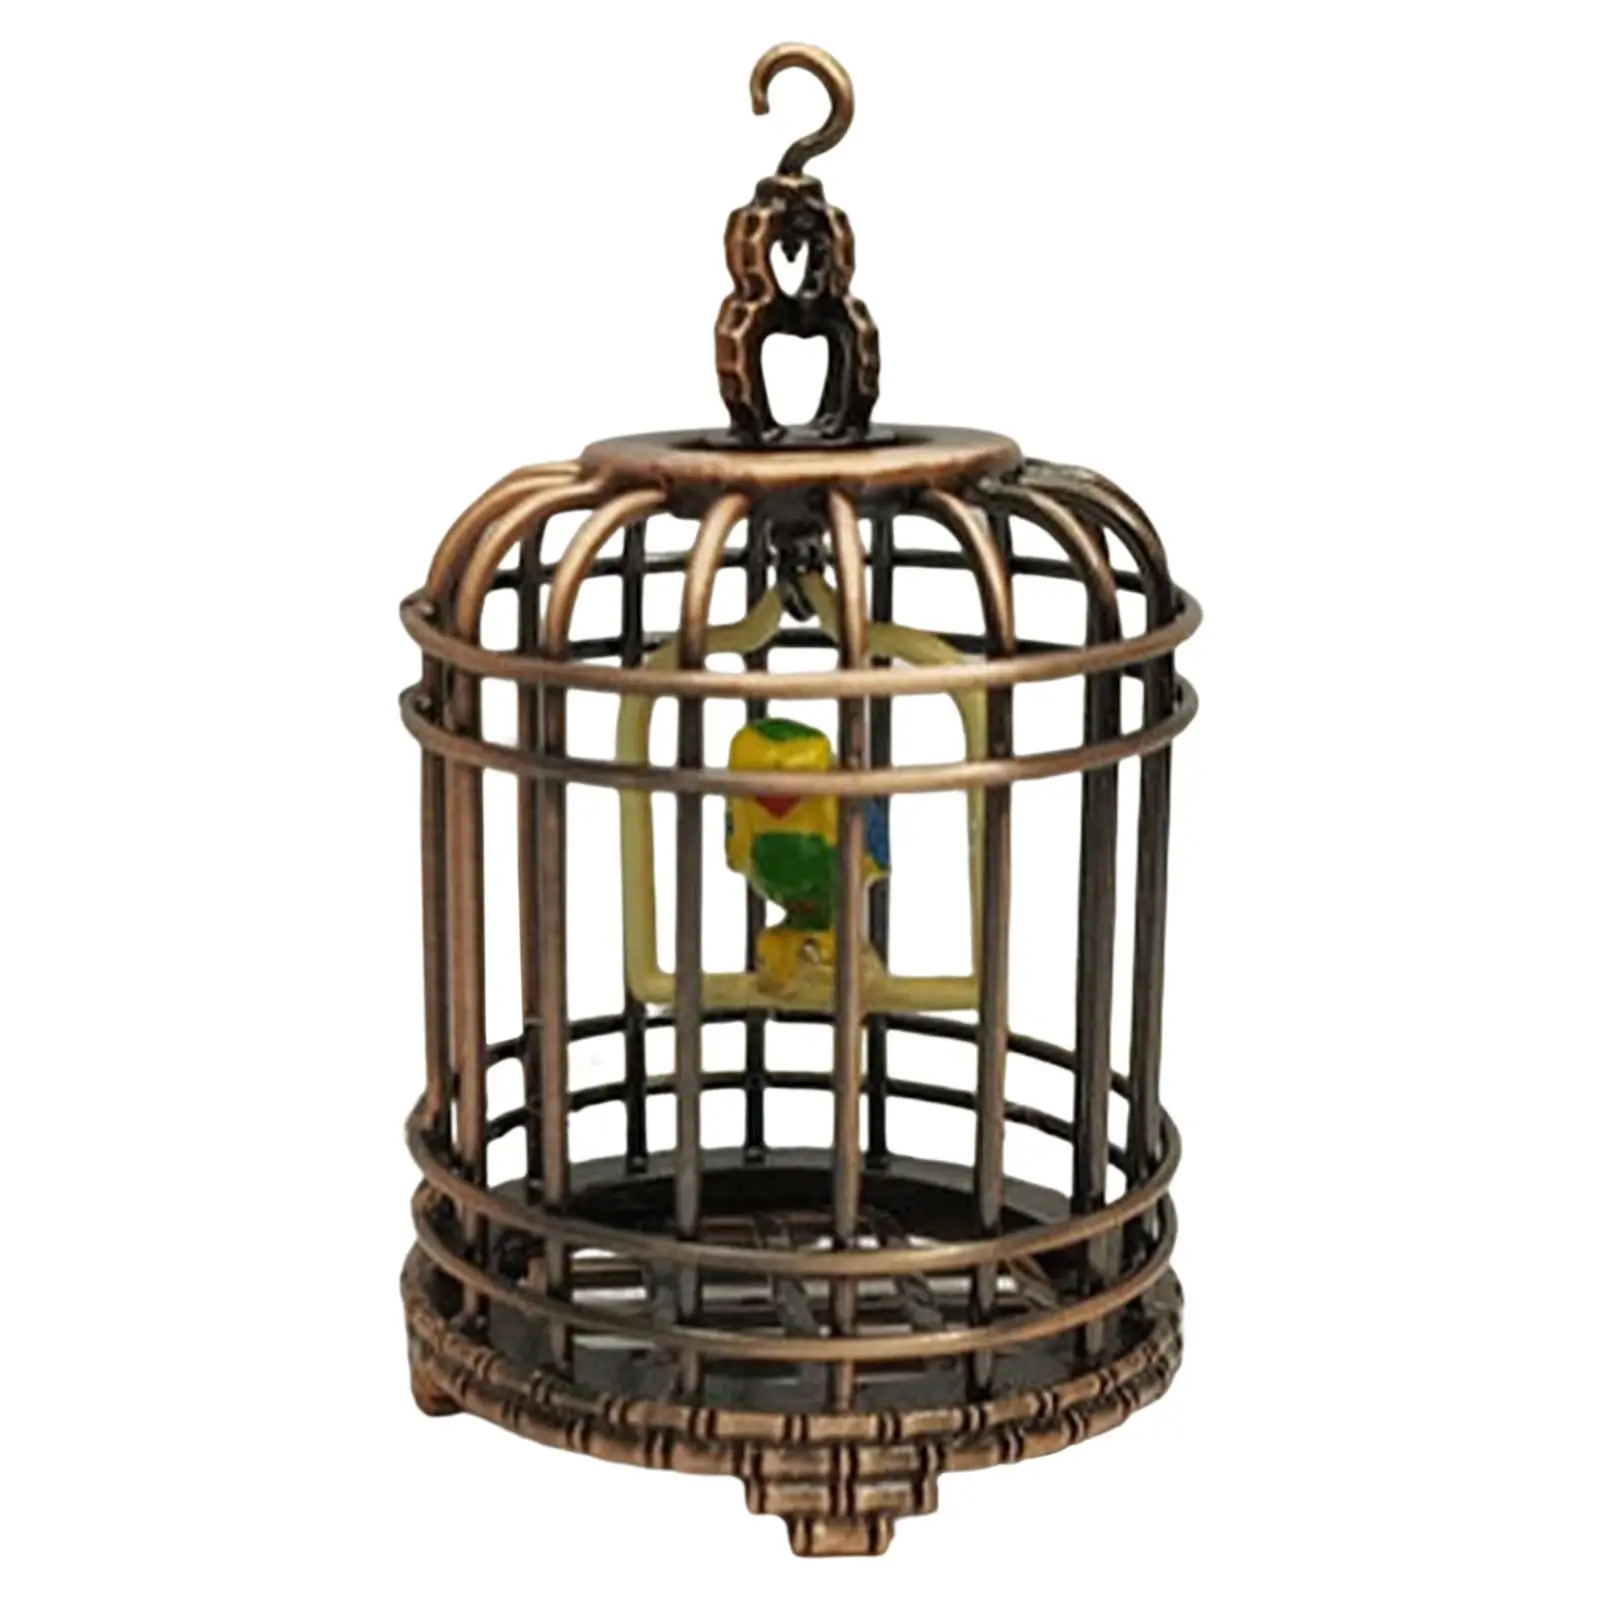 Simulation Birdcage, Miniature Dollhouse Bird Cage with Bird, Hanging Hook for